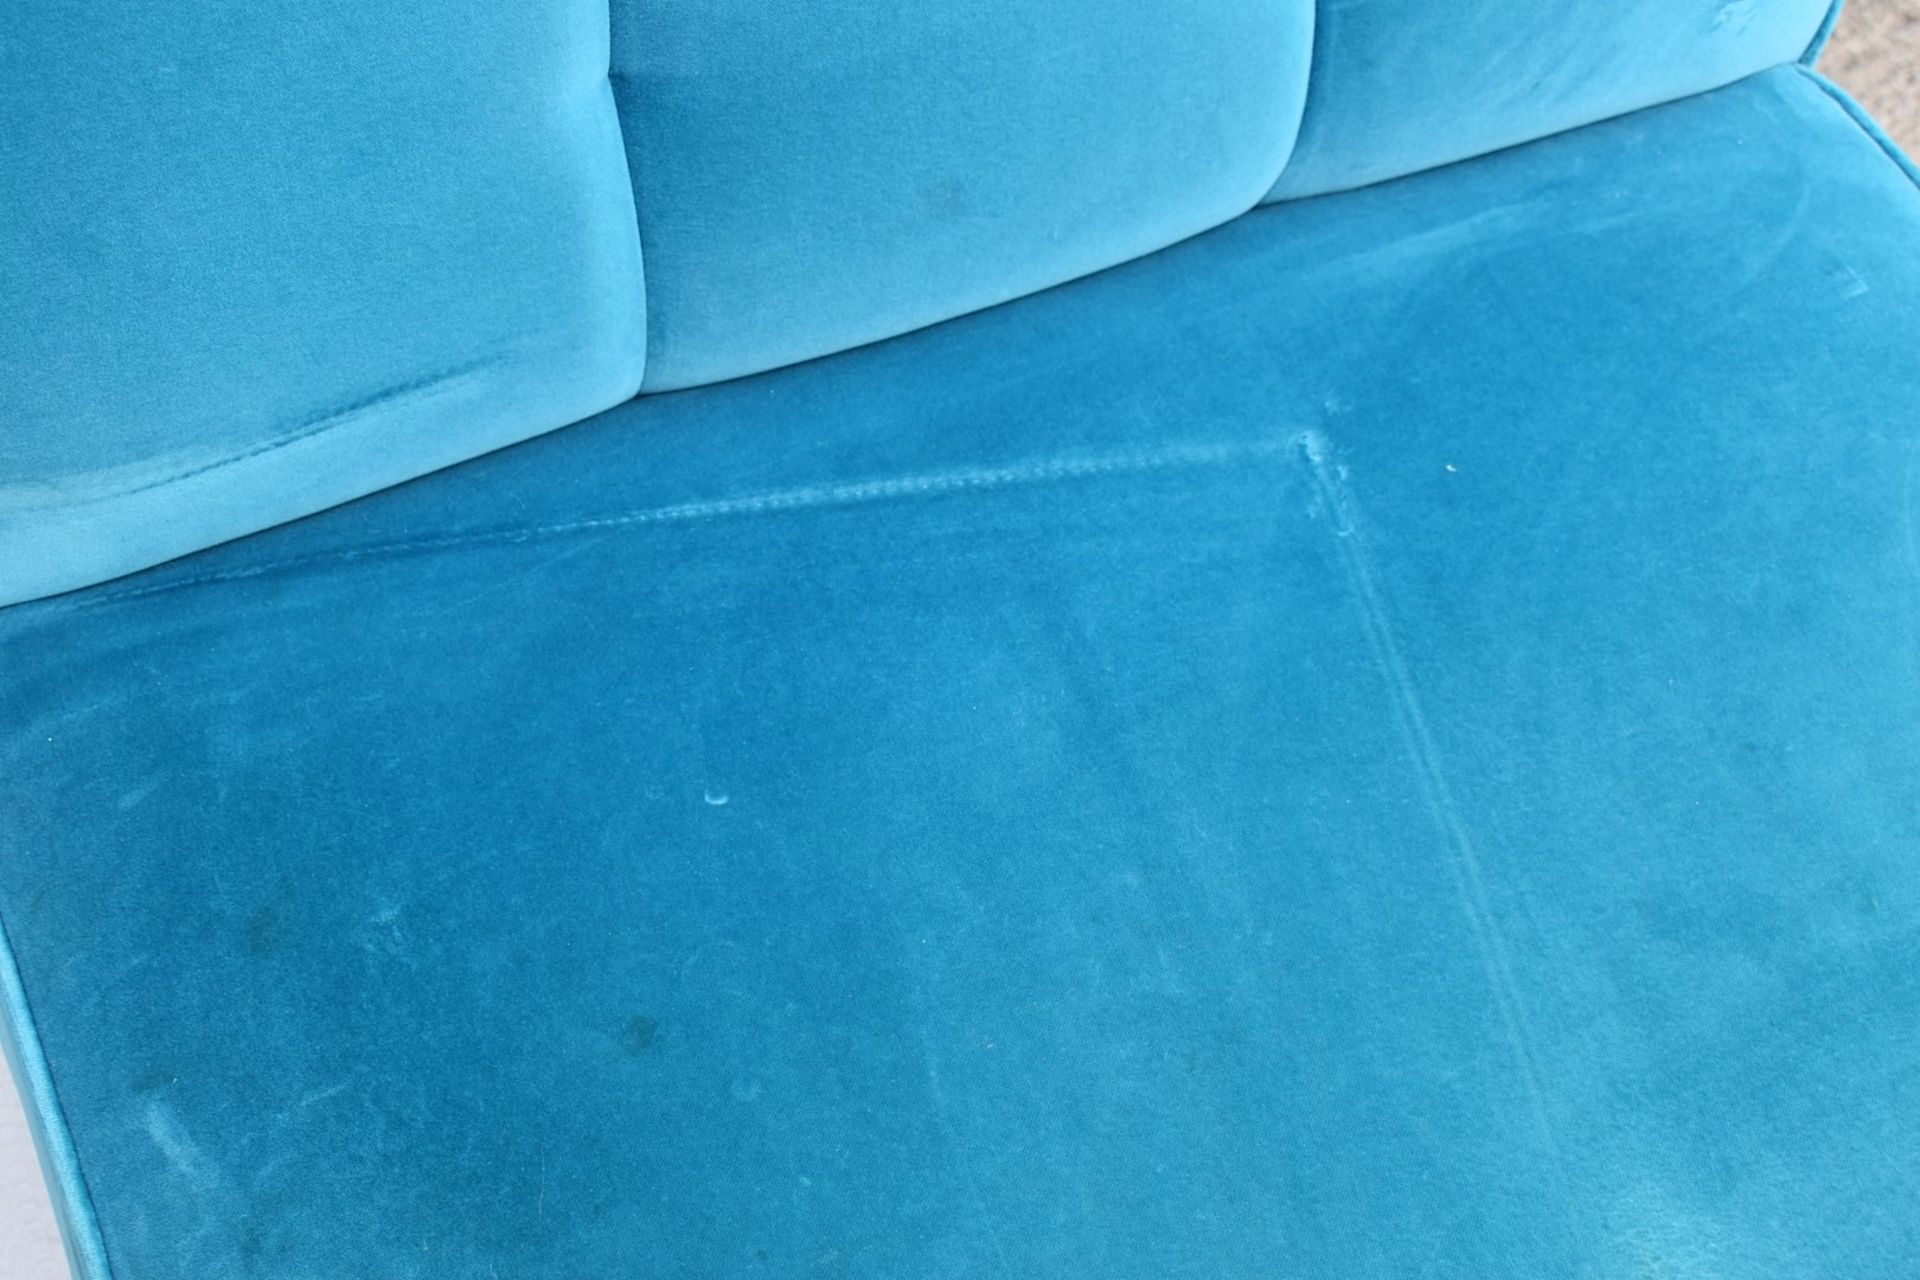 1 x Large Blue Velvet Upholstered Armchair - Ref: HBK501 / WH2 - CL987 - Location: Altrincham WA14* - Image 5 of 10